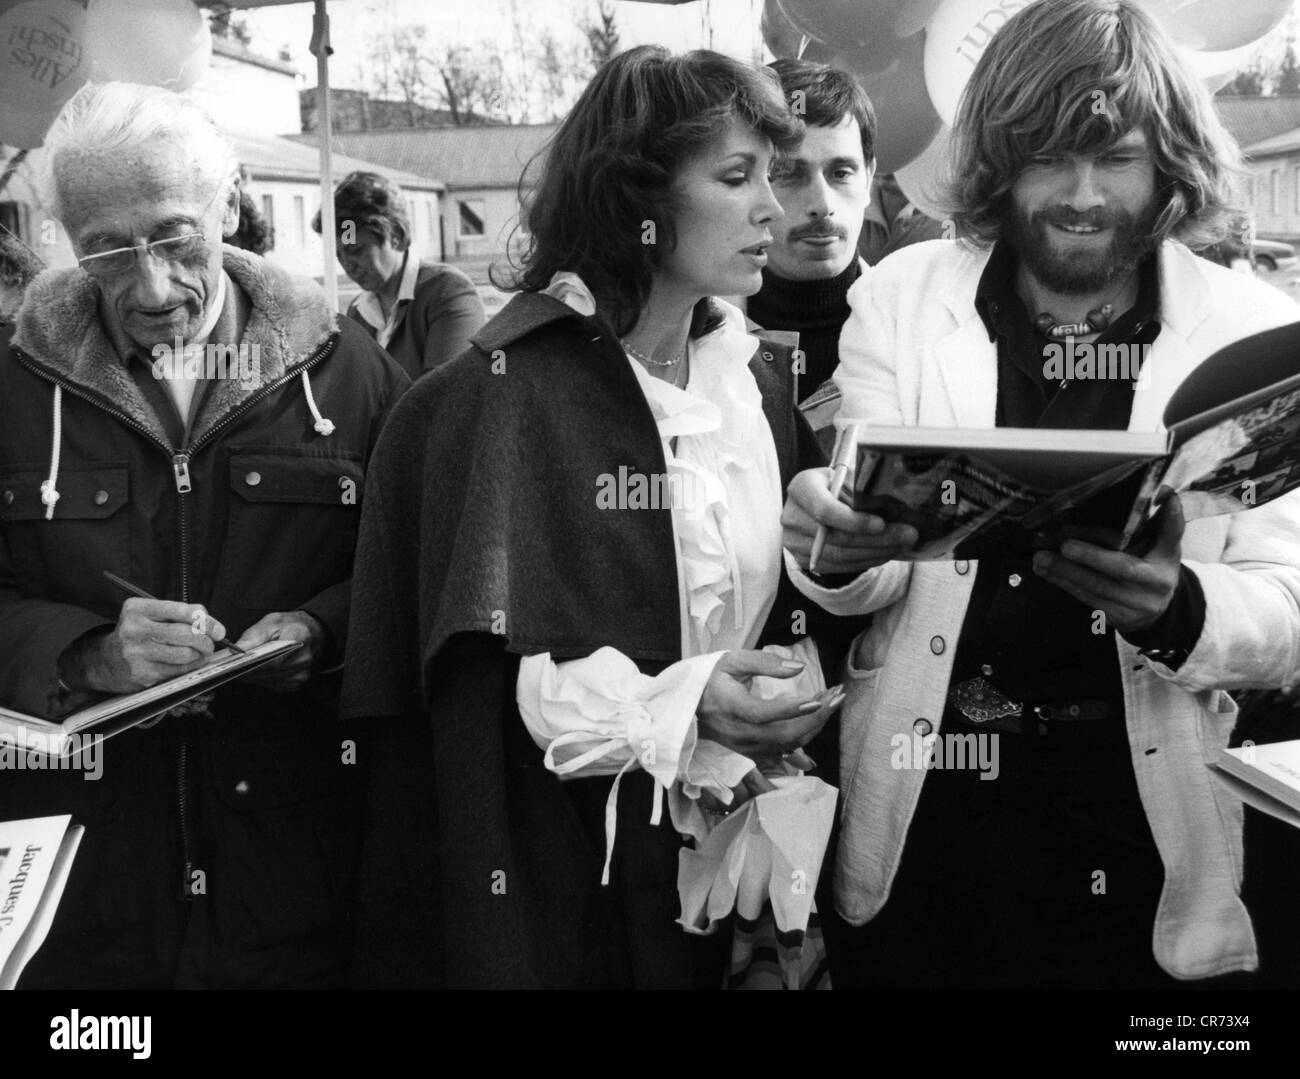 Schuermann, Petra, 15.9.1935 - 13.1.2010, German actress, TV presenter, half length, with Jacques Costeau and Reinhold Messner, signing the book 'Die letzten Abenteuer dieser Erde' (The last adventures of this earth), Munich, Germany, 26.11.1981, Stock Photo